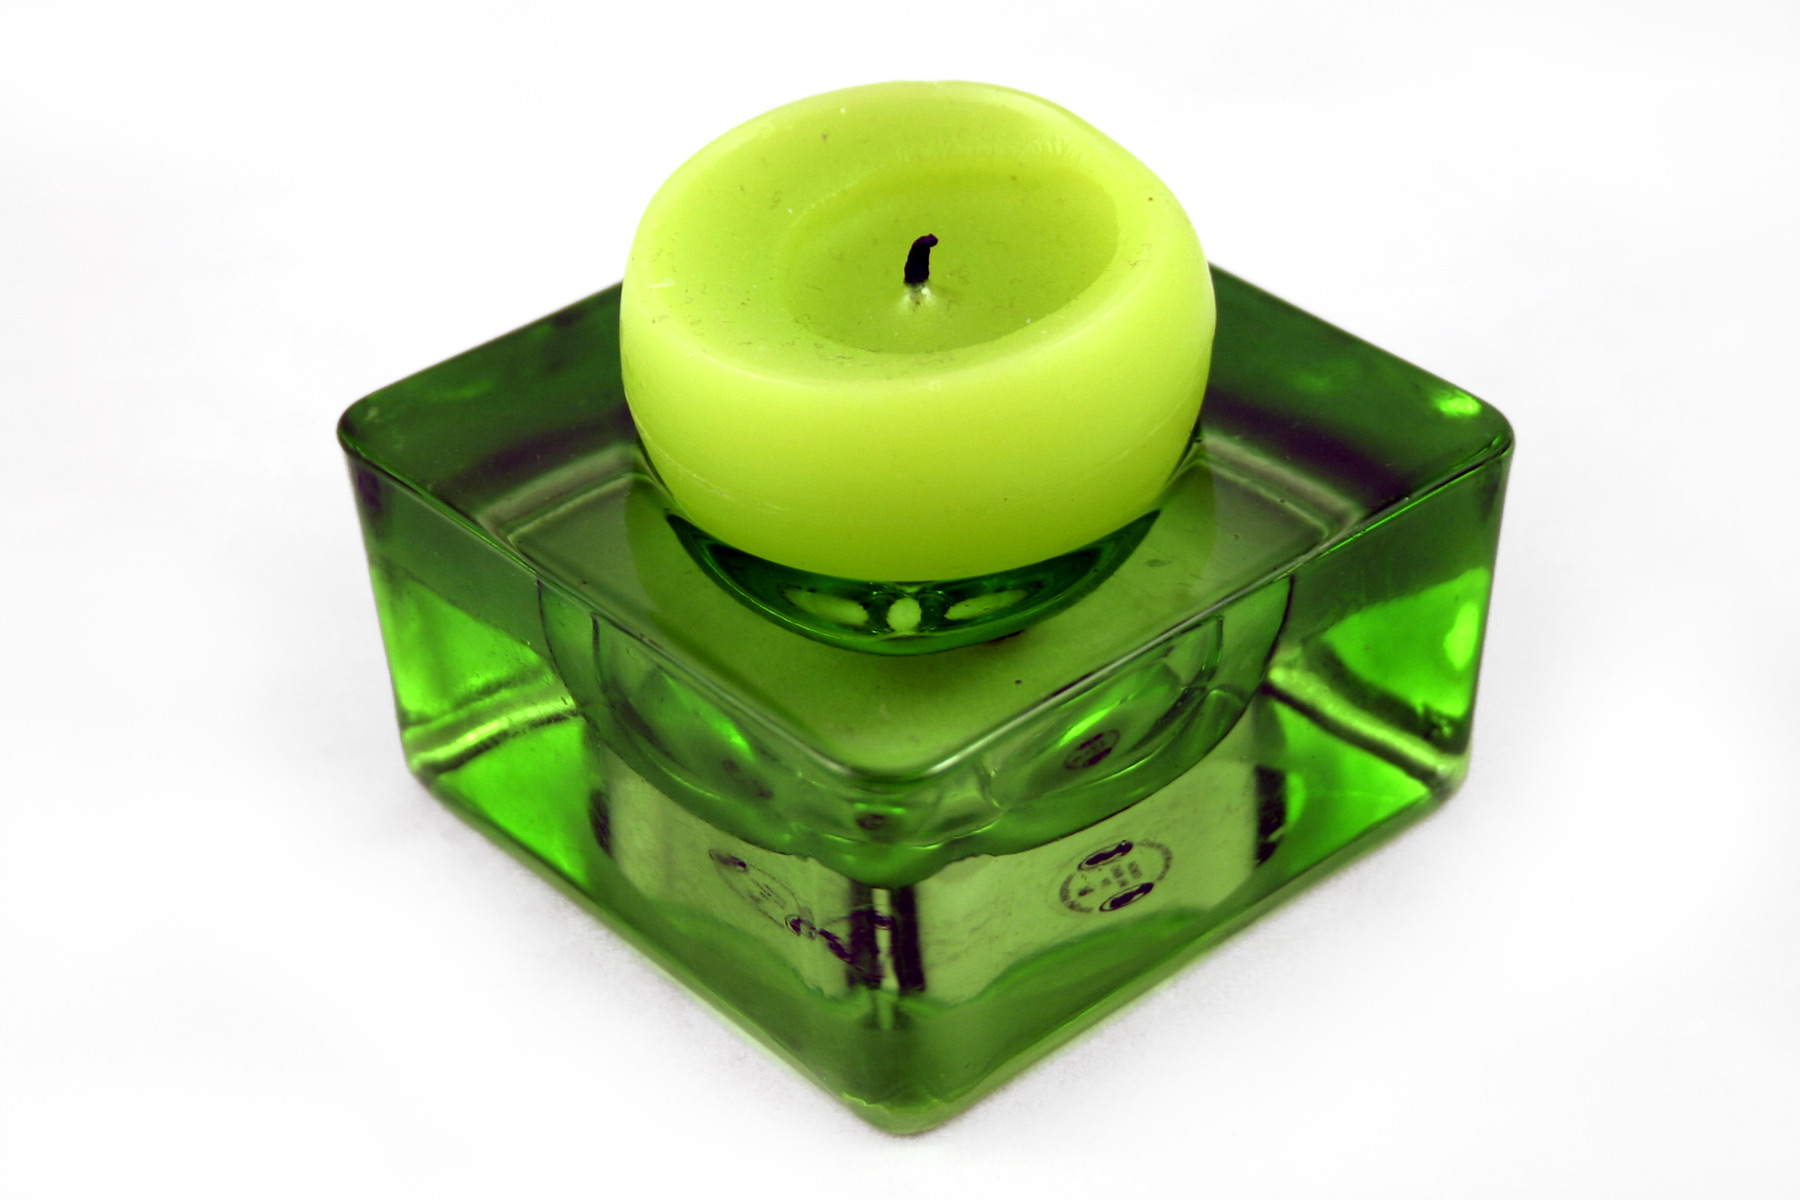 Green candle photo